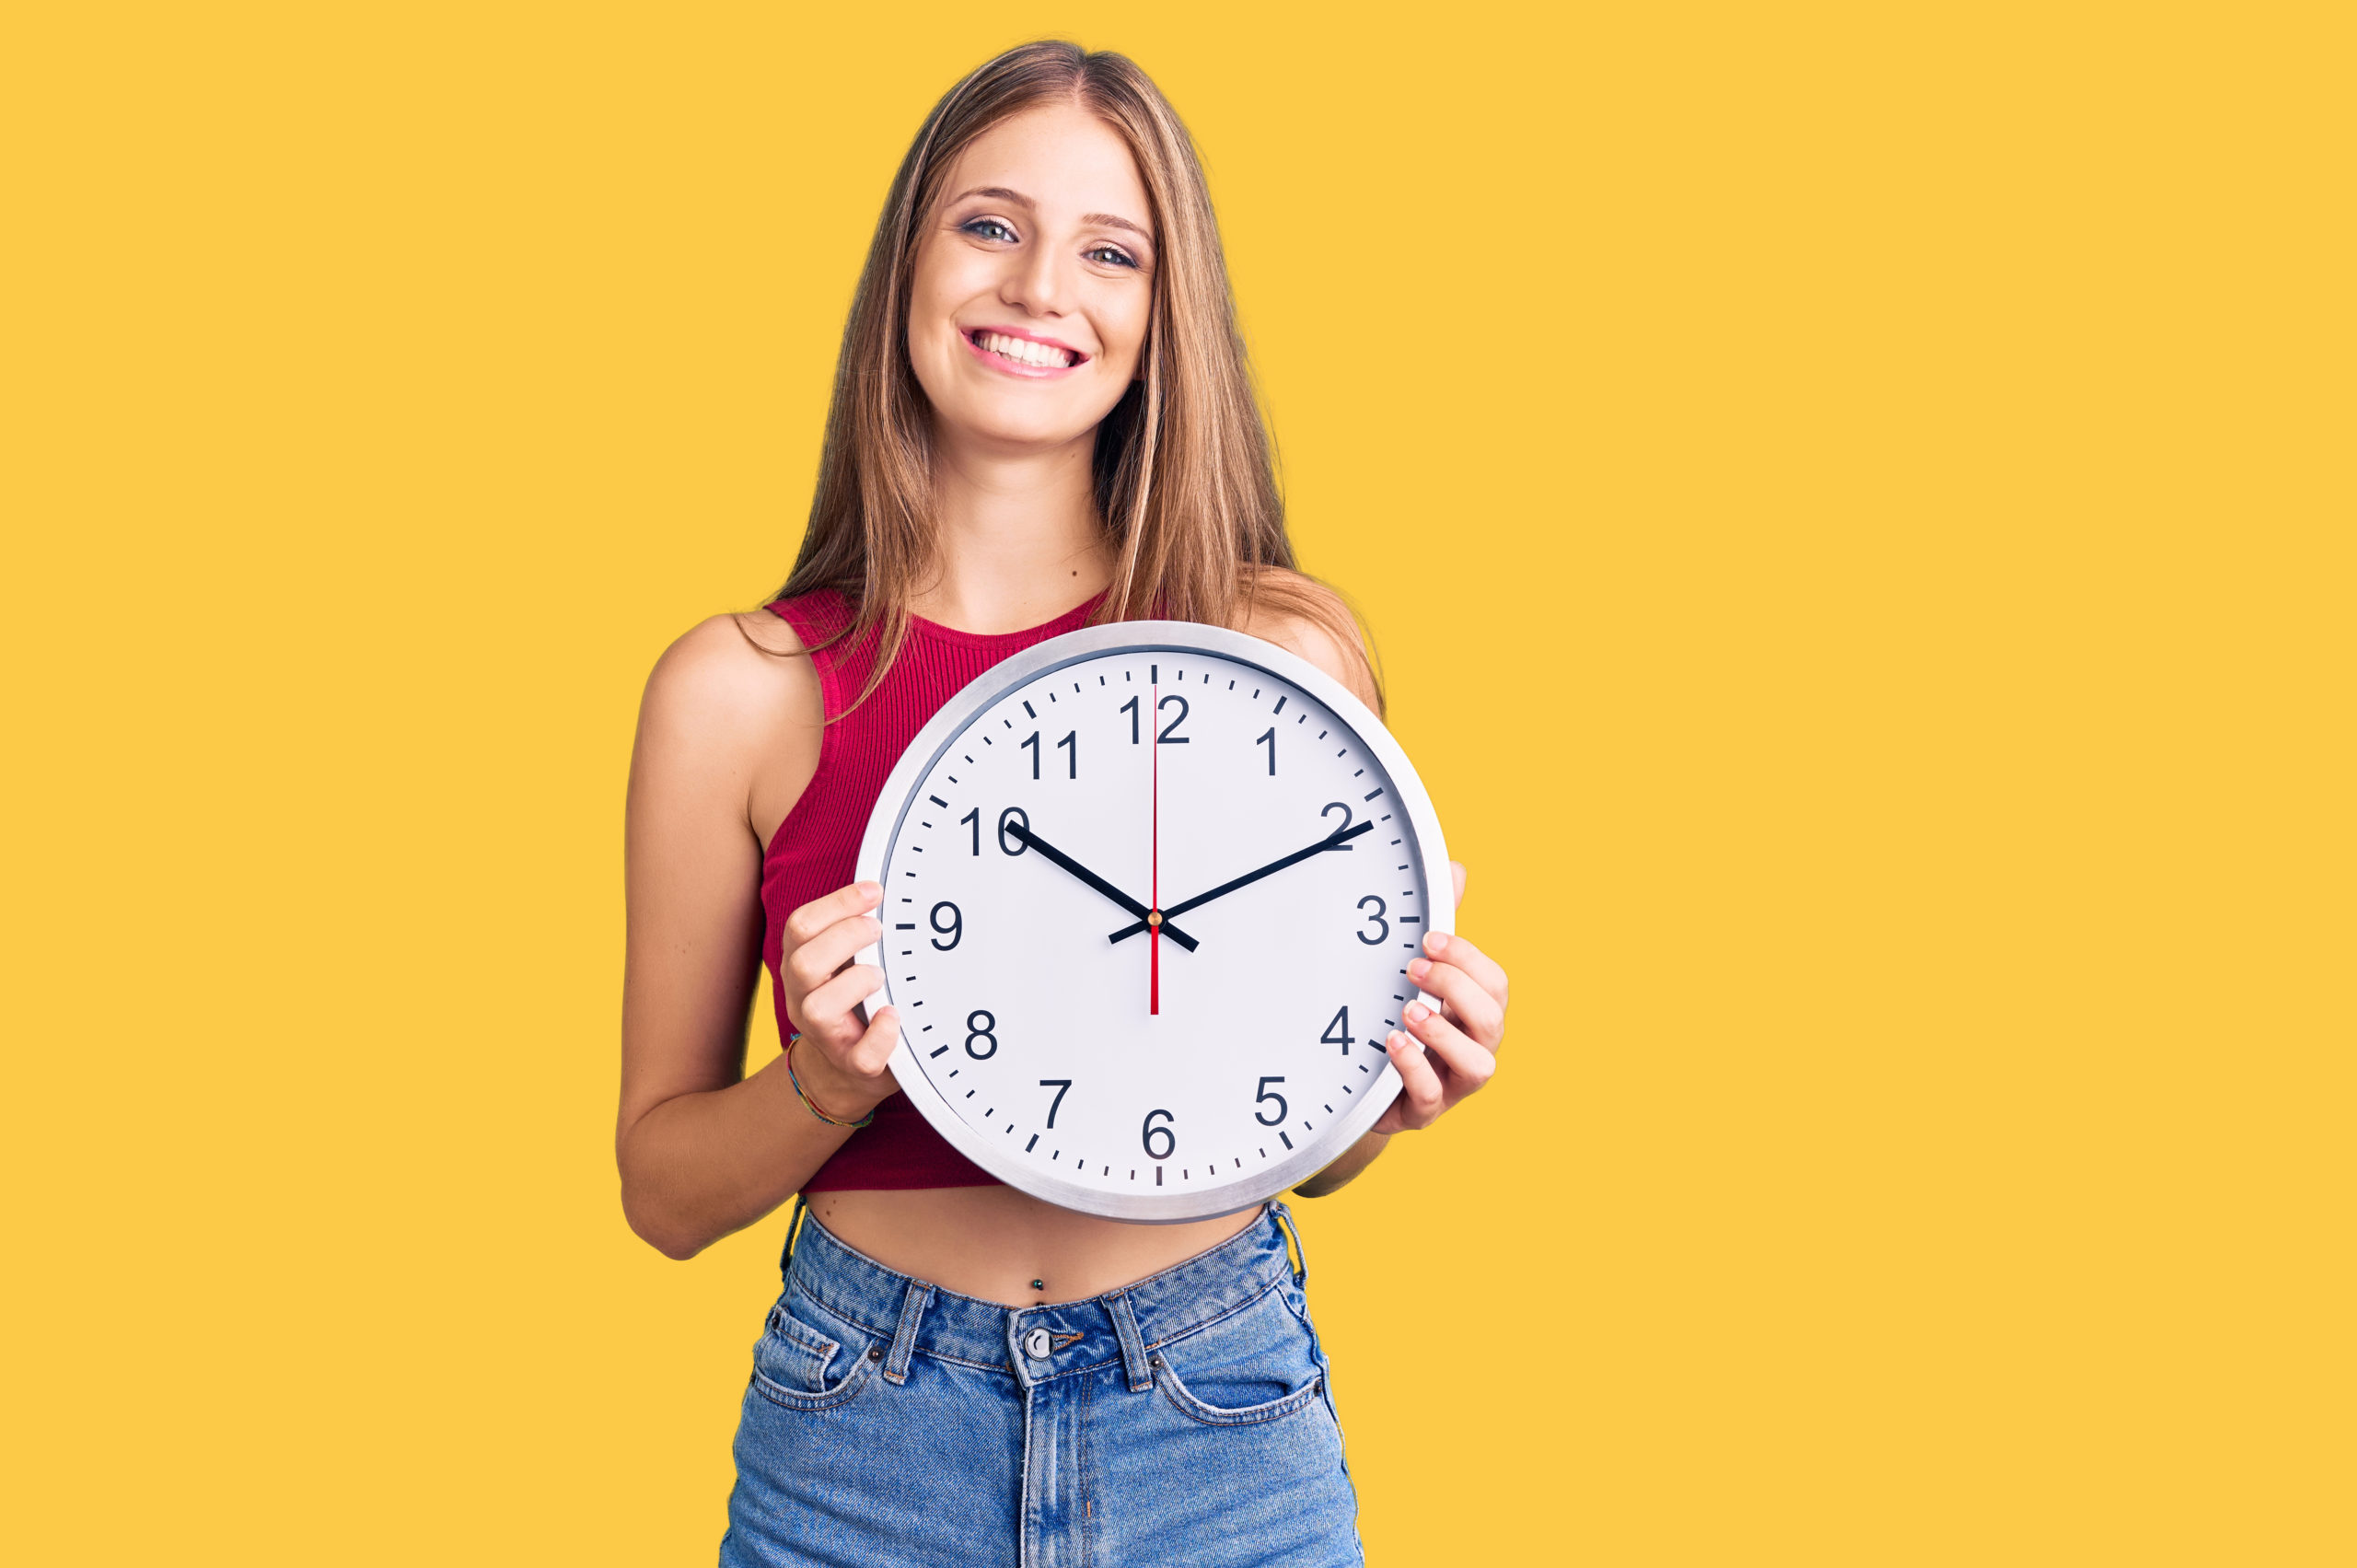 Woman smiling showing clean teeth with a clock